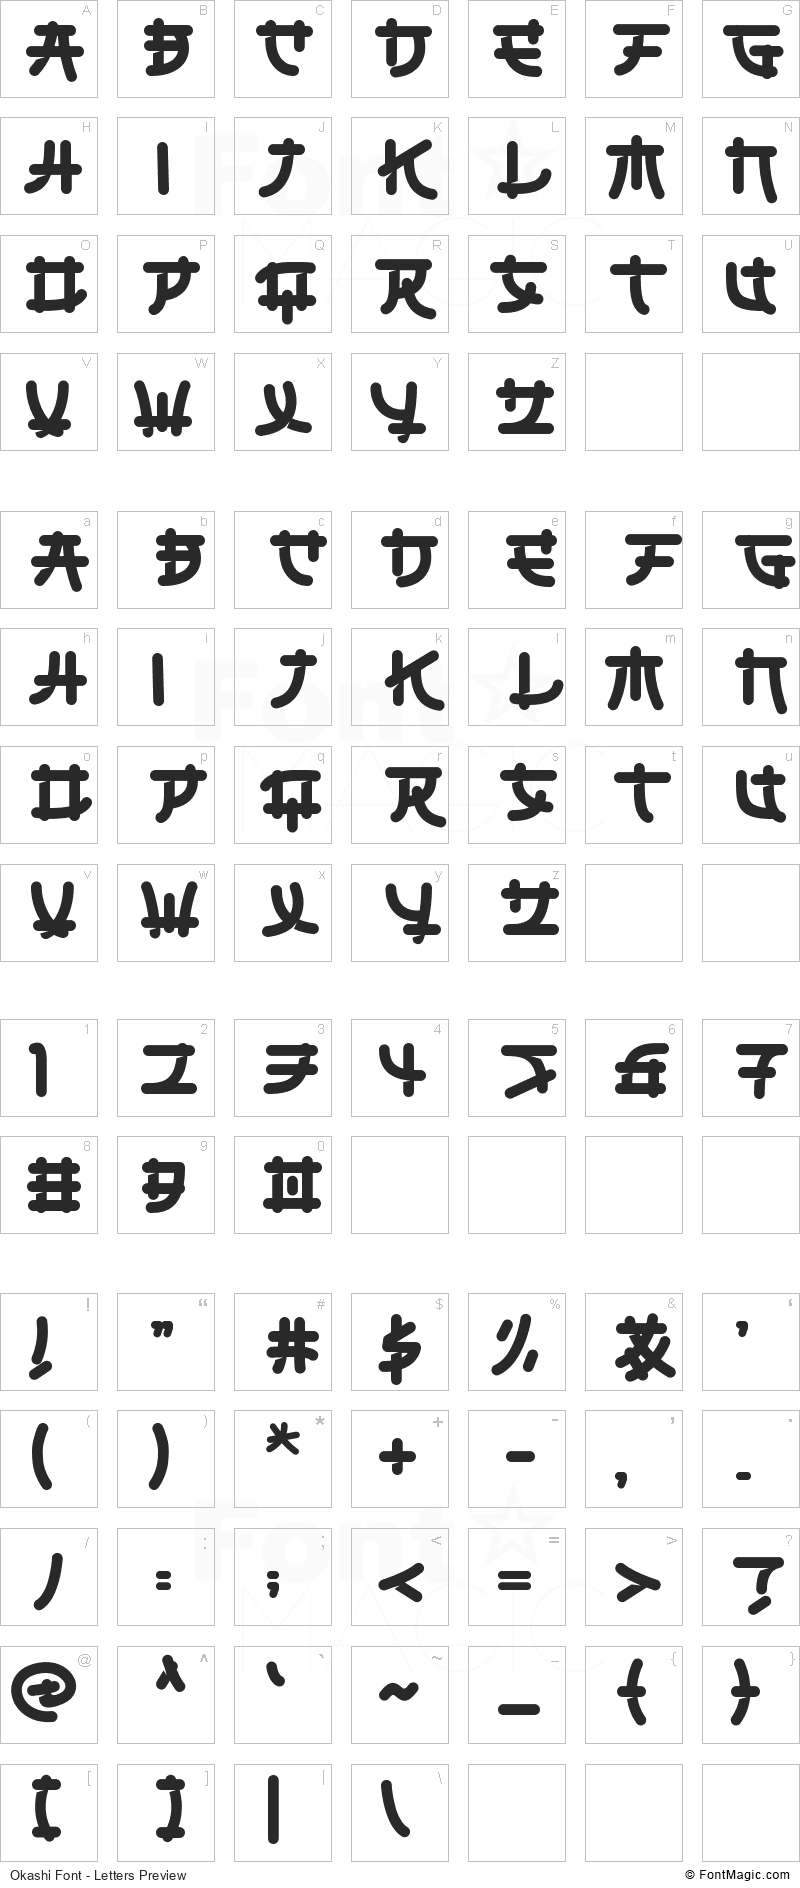 Okashi Font - All Latters Preview Chart